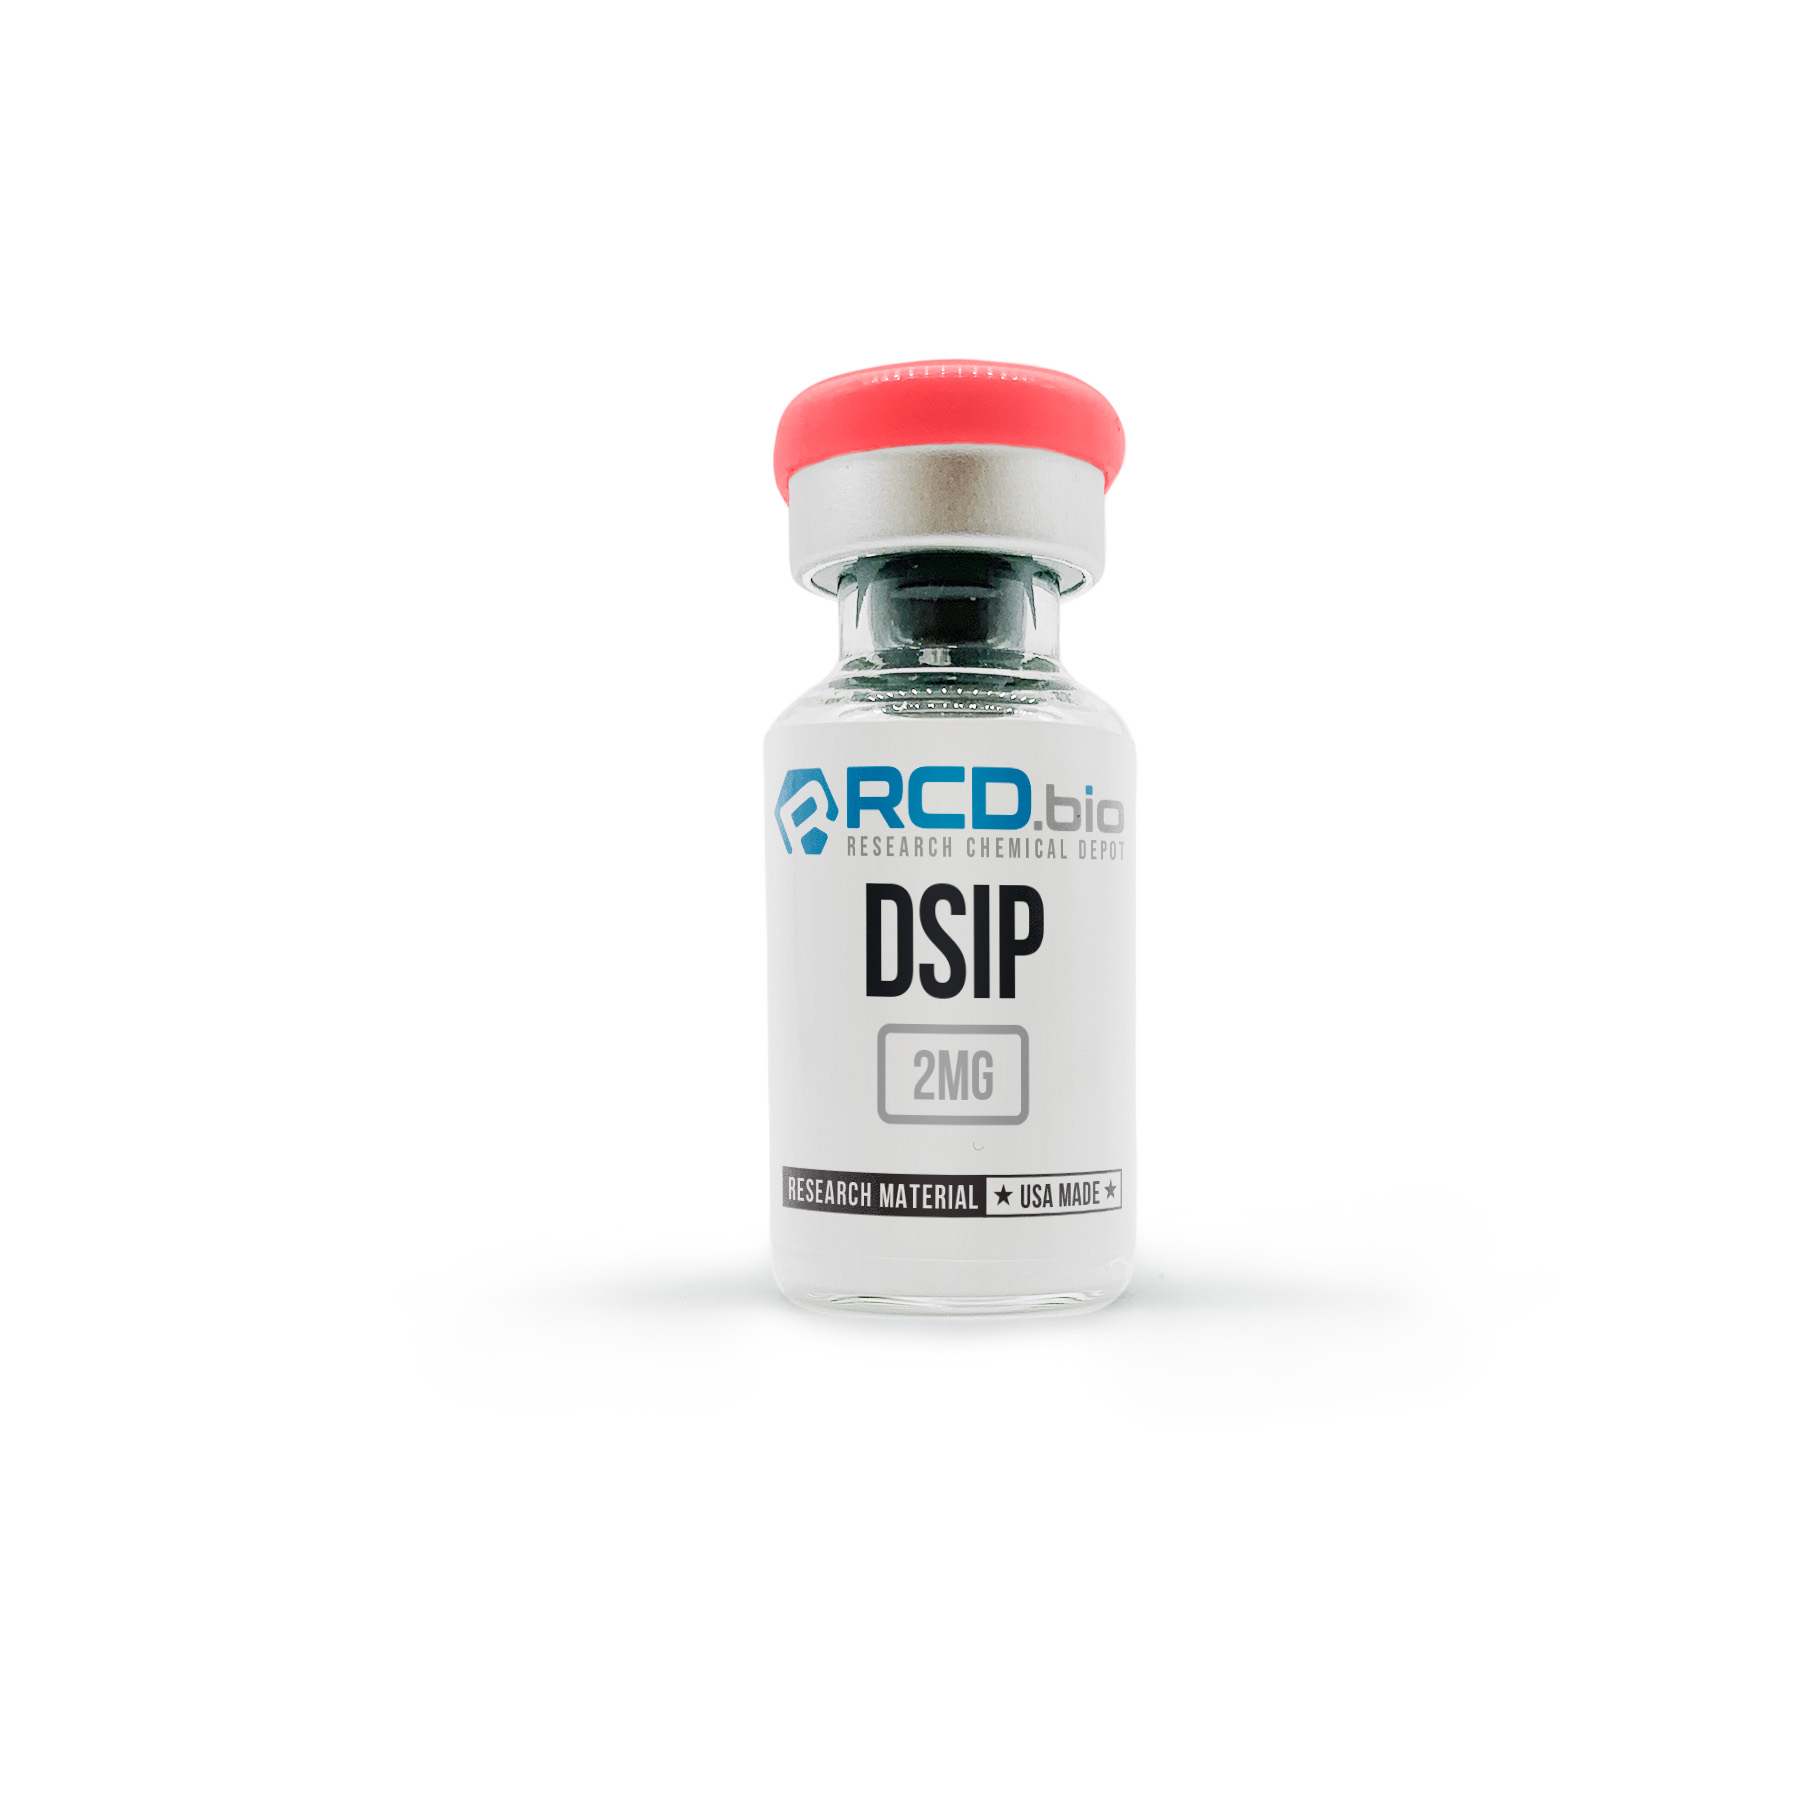 DSIP Peptide For Sale | Fast Shipping | RCD.bio